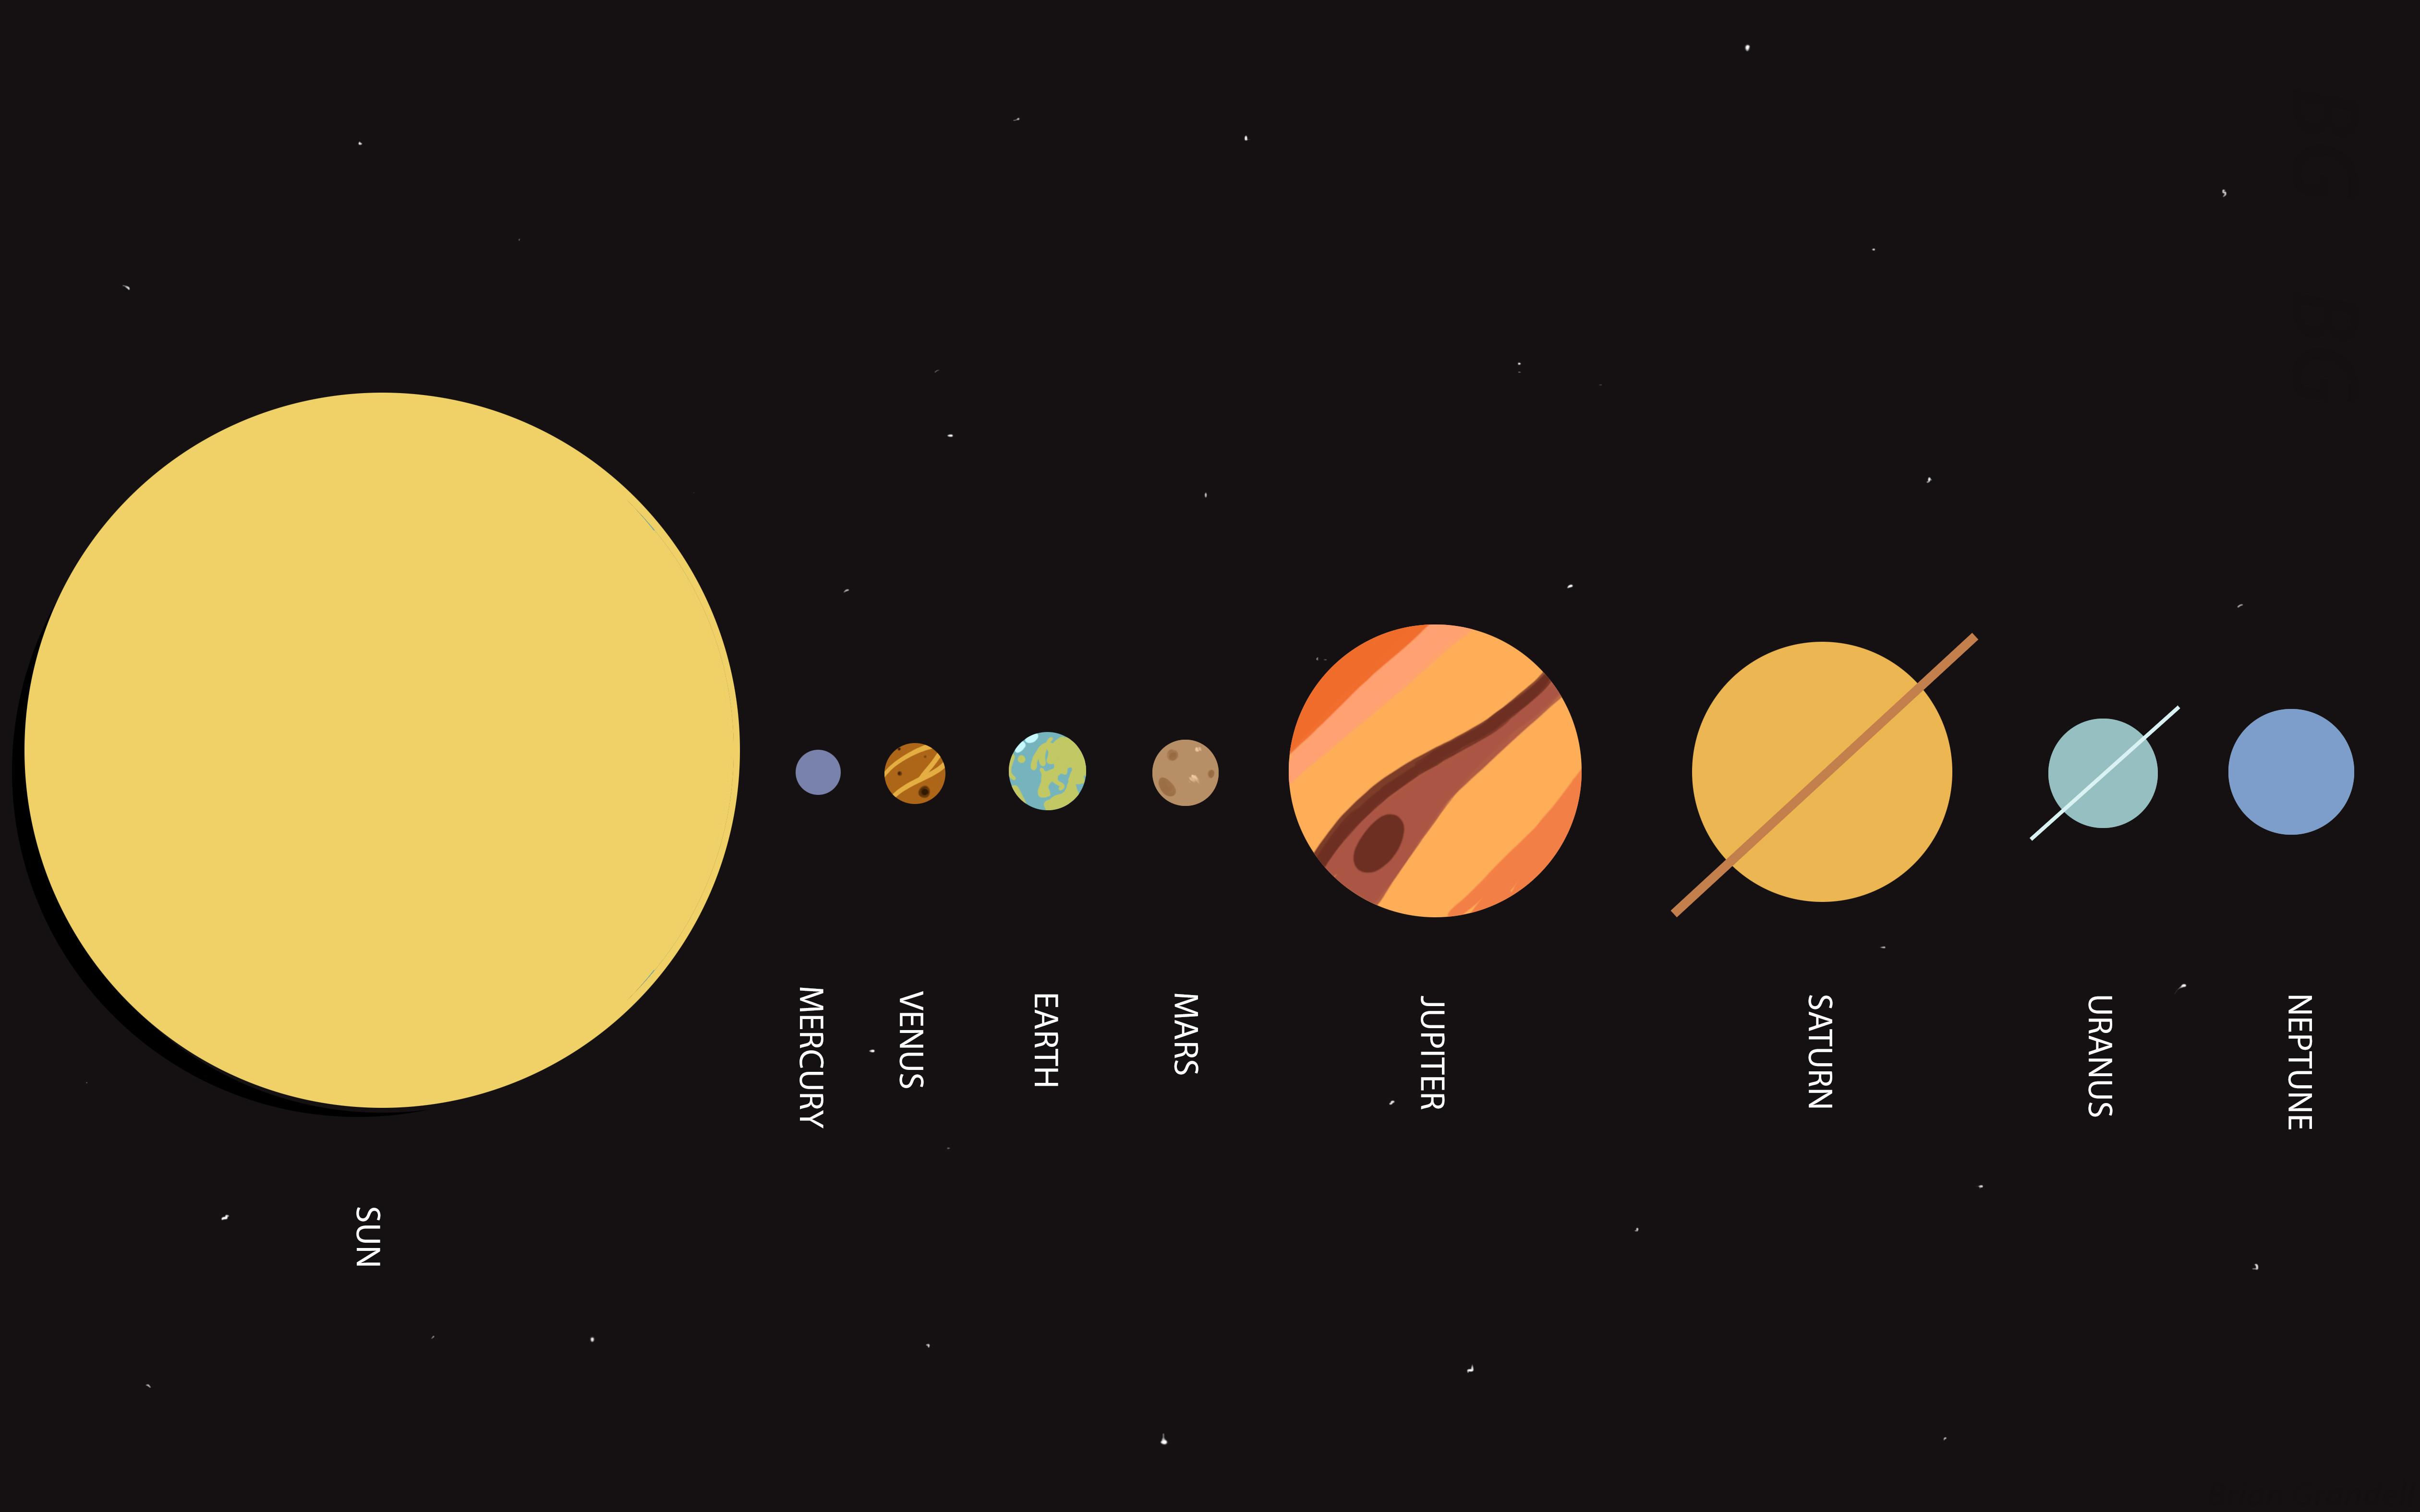 Tried my hand at making a minimalist style solar system